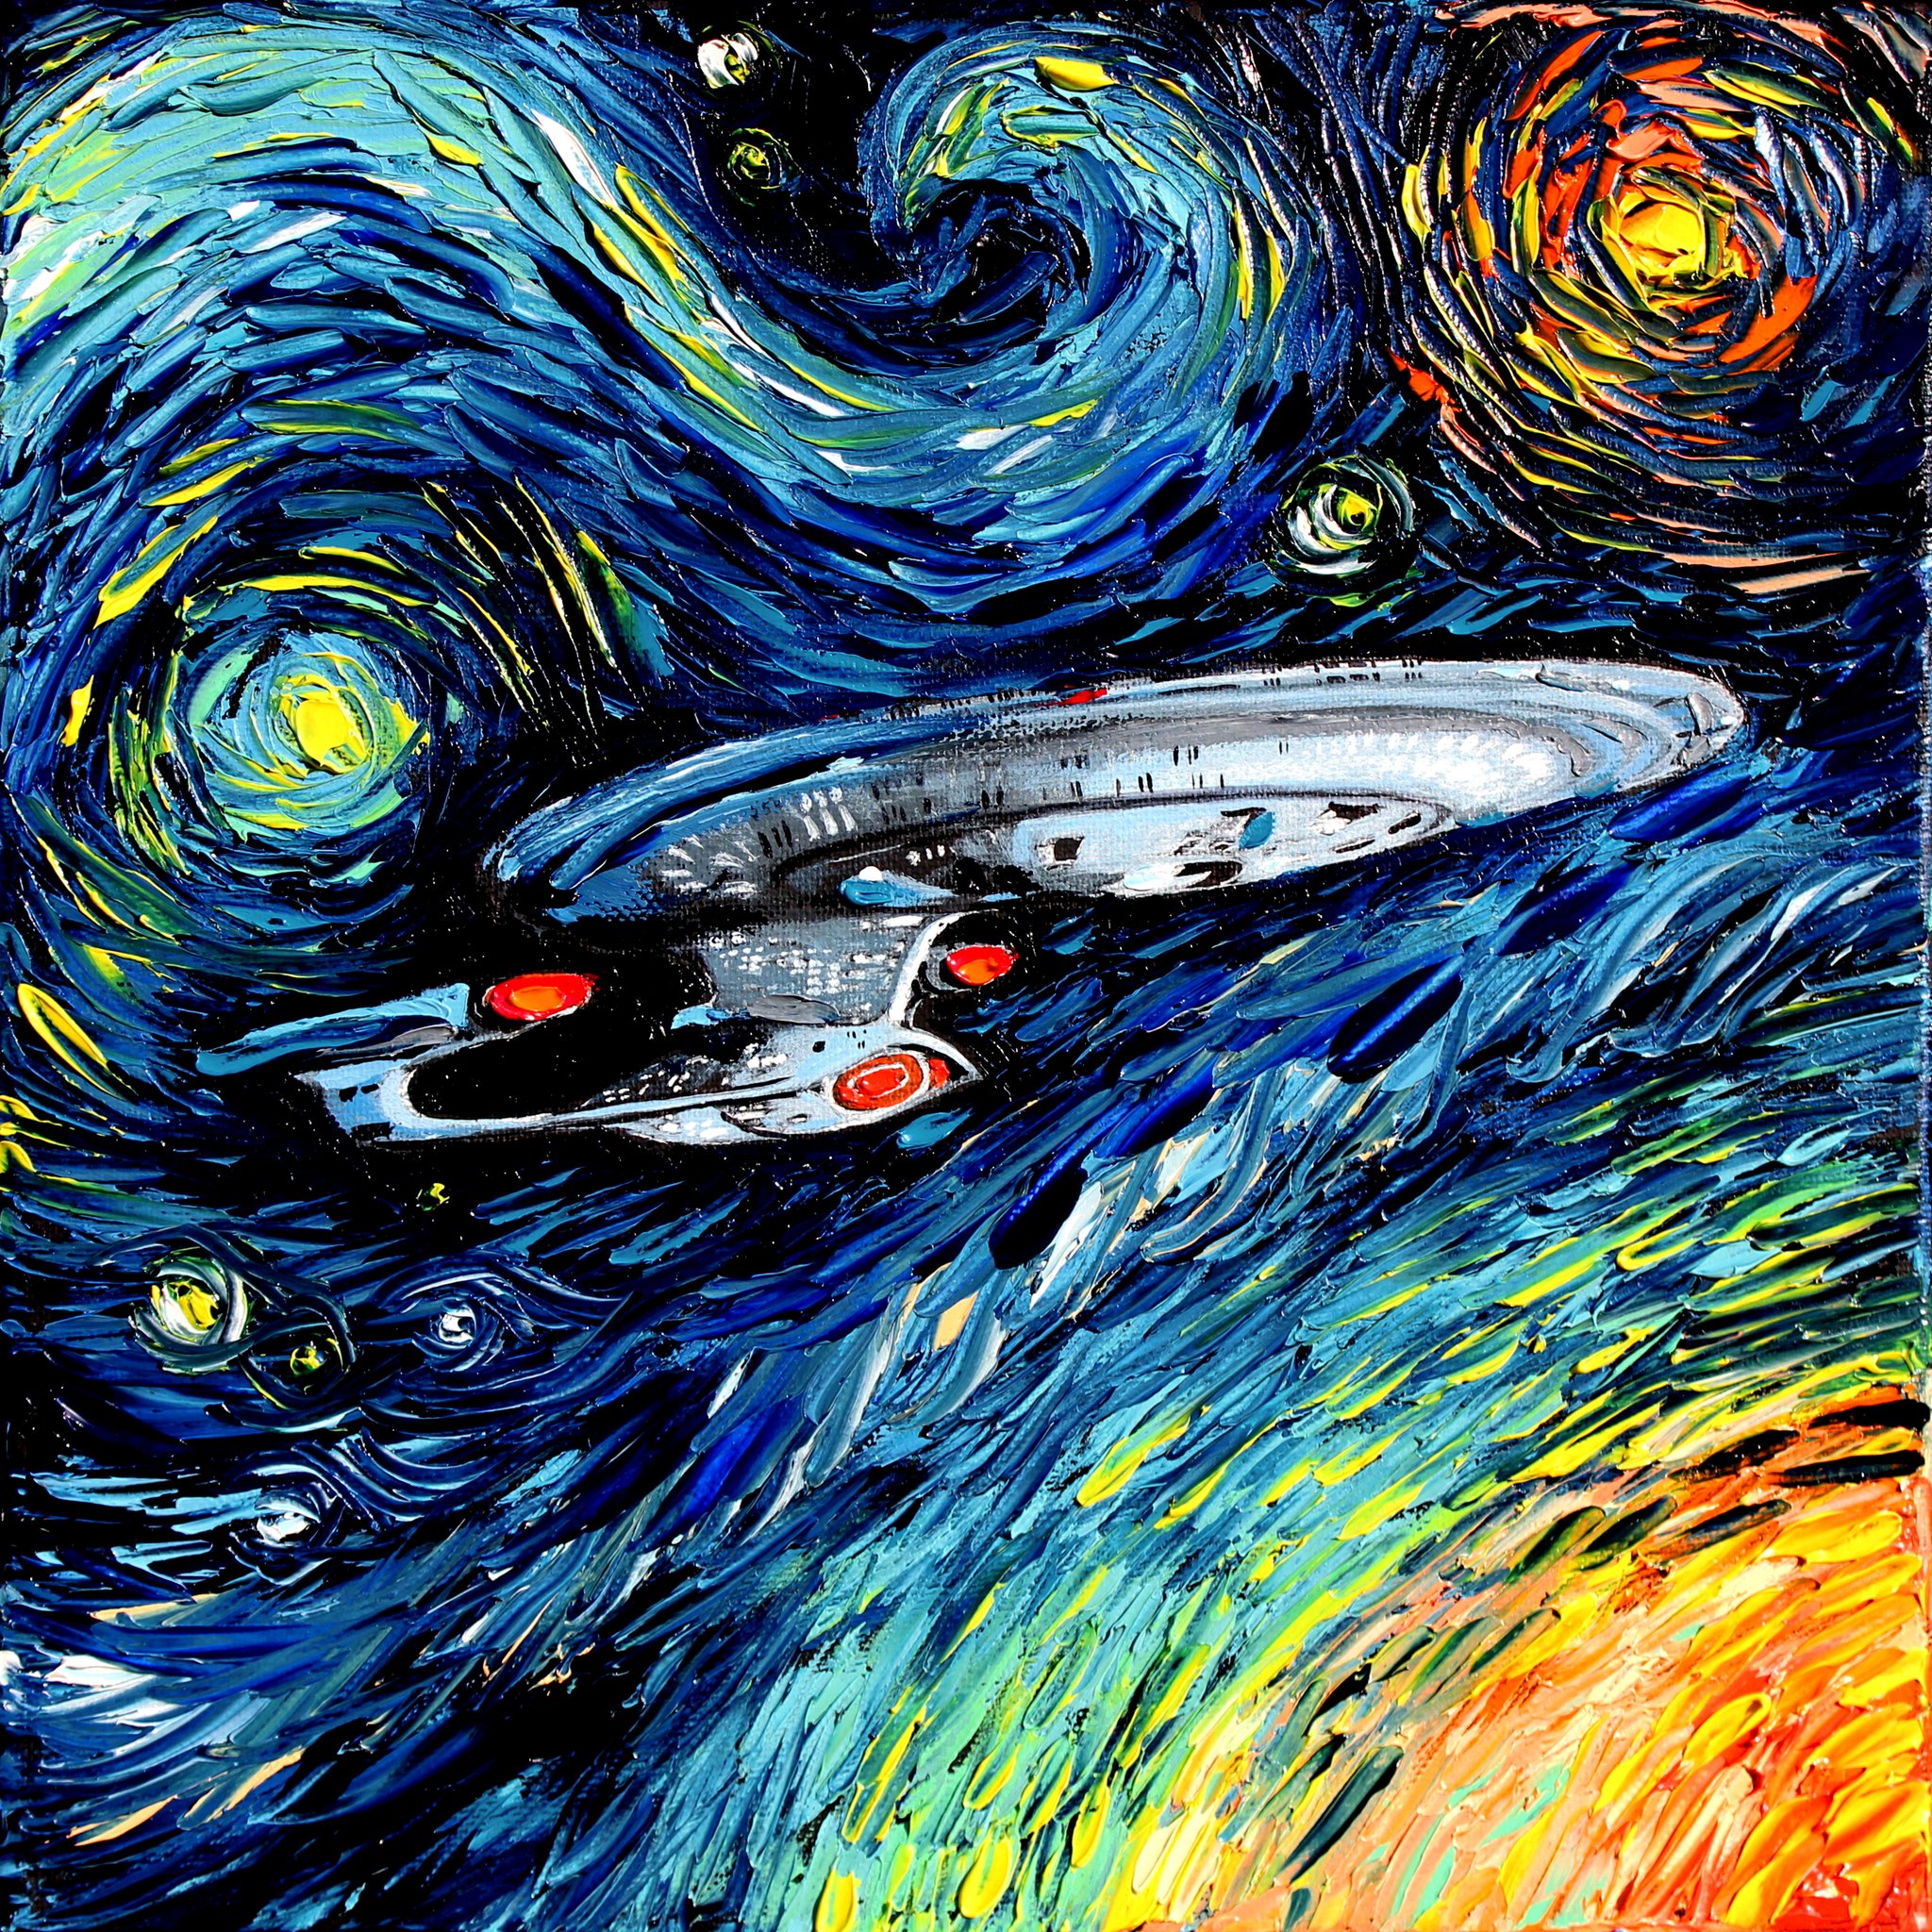 General 2048x2048 traditional art painting artwork Star Trek Vincent van Gogh humor The Starry Night starry night spaceship TV series colorful the next generation star trek: the next generation Star Trek Ships USS Enterprise NCC-1701D